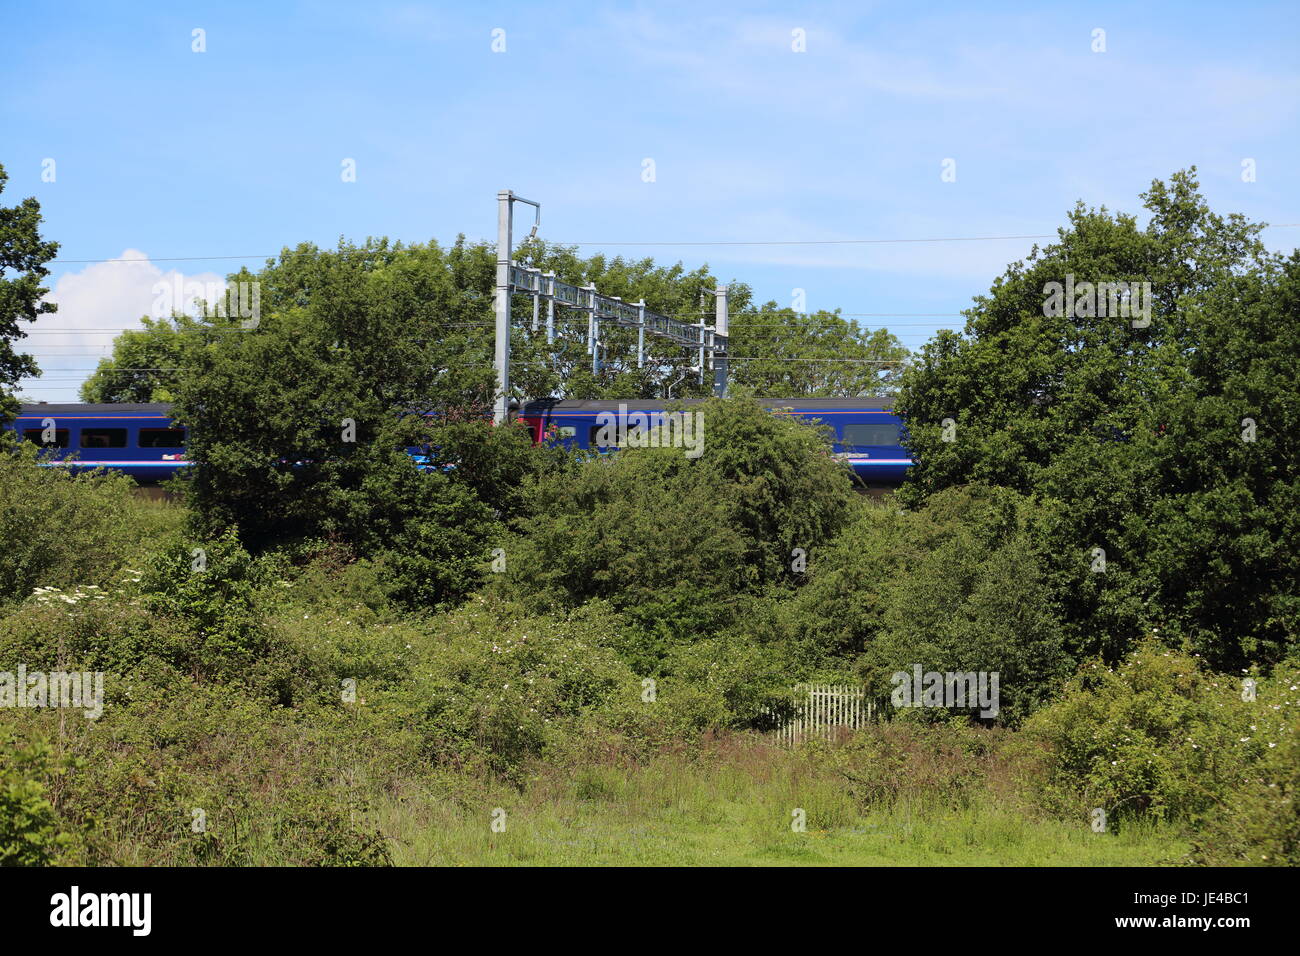 A High sped train flashes through a gap in the greenery along an embankment under all the newly installed Overhead line equipment in  rural location. Stock Photo